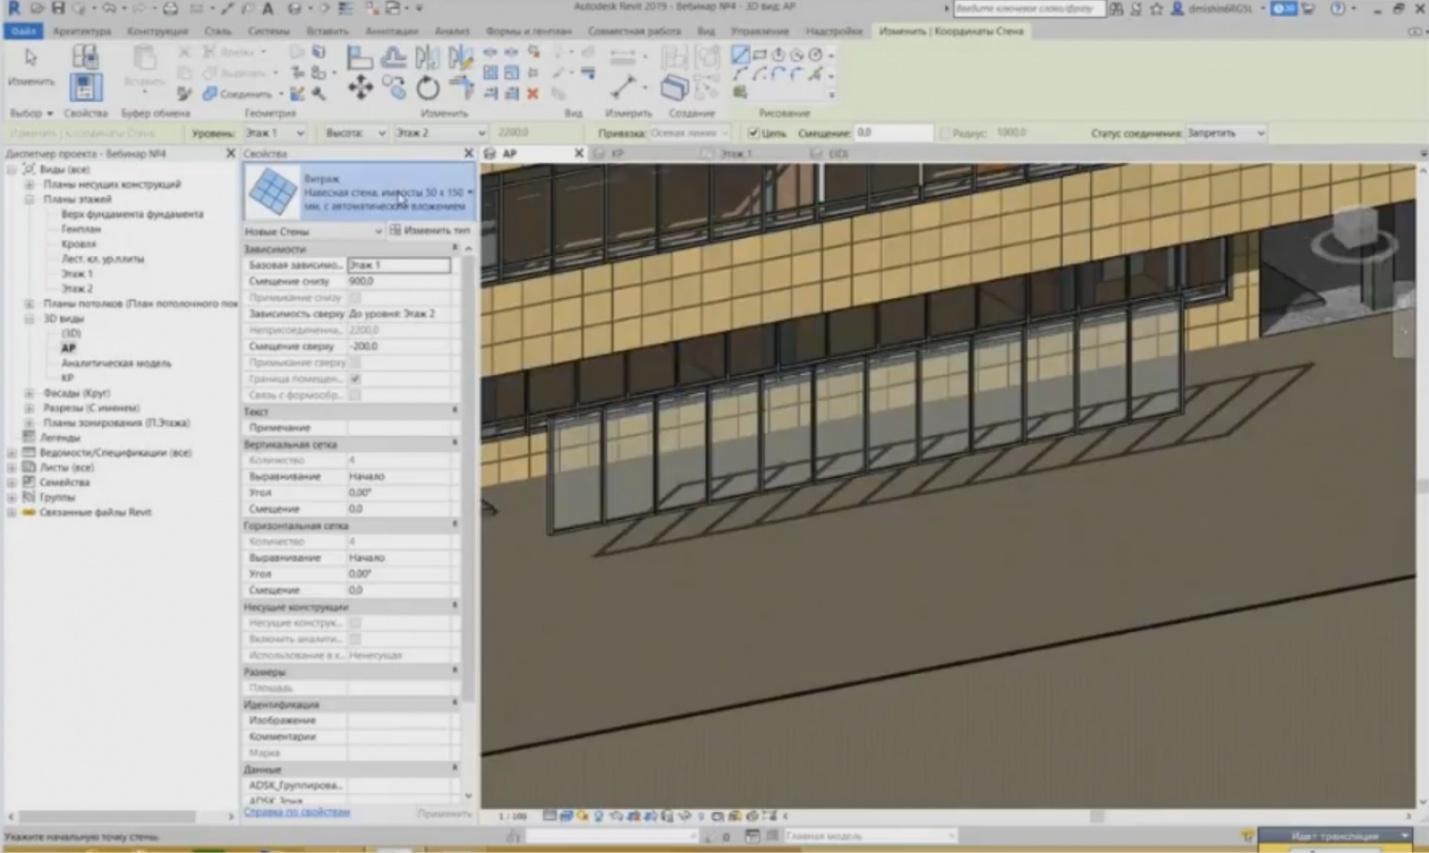 BIM DESIGN IN REVIT. CREATING ARCHITECTURAL AND STRUCTURAL ELEMENTS. PAGE 2-29